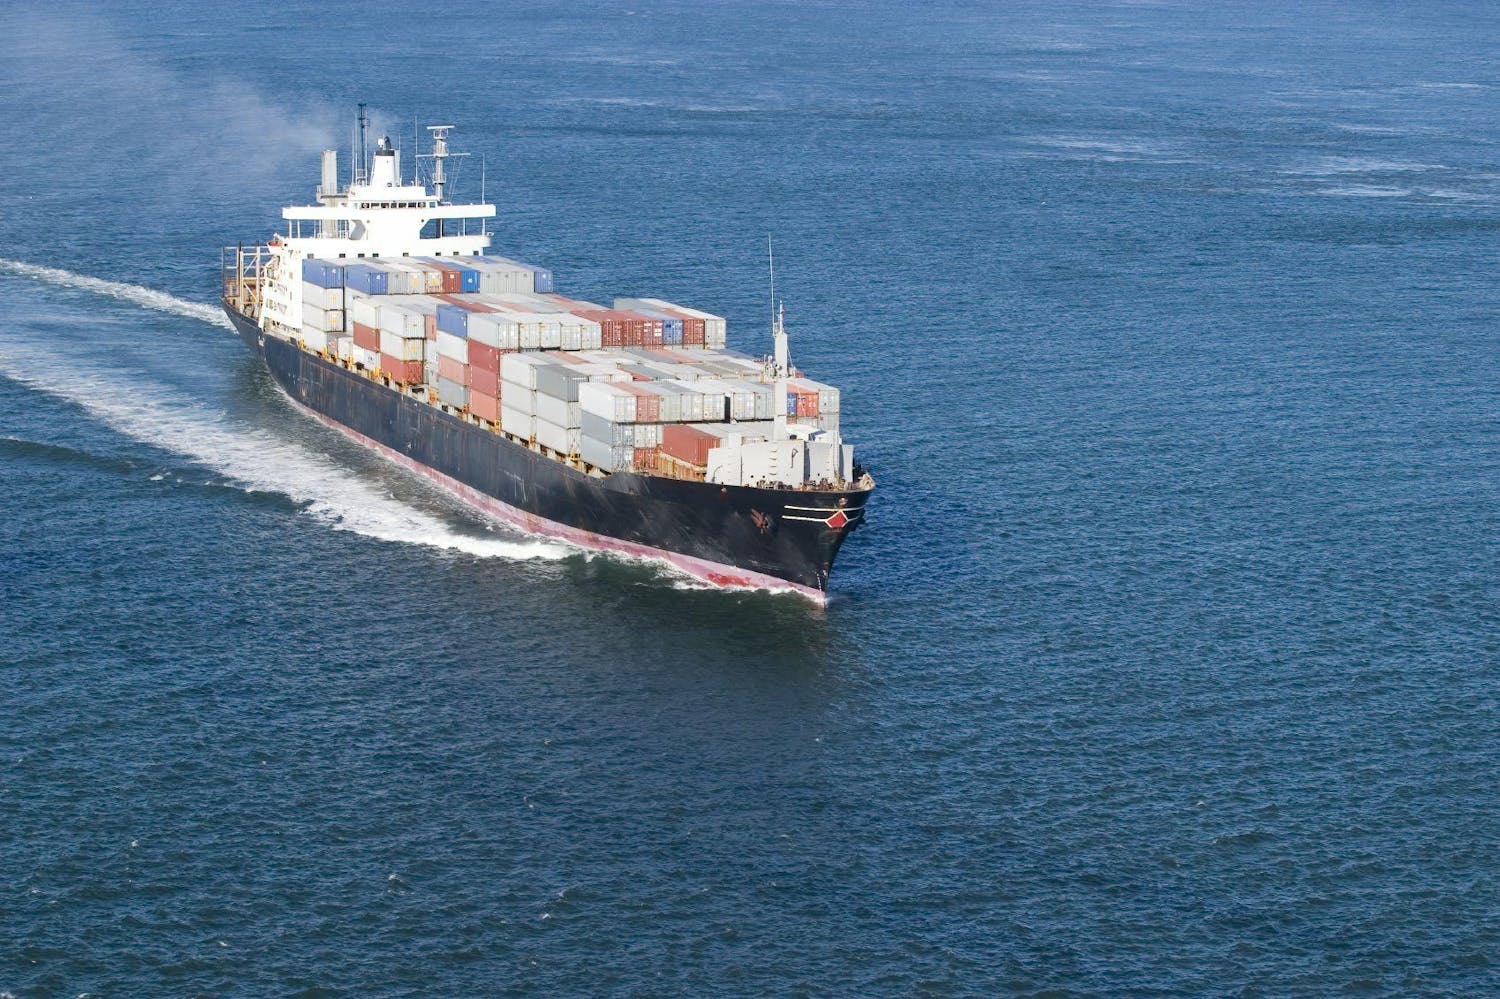 Full container ship transporting cargo in the ocean